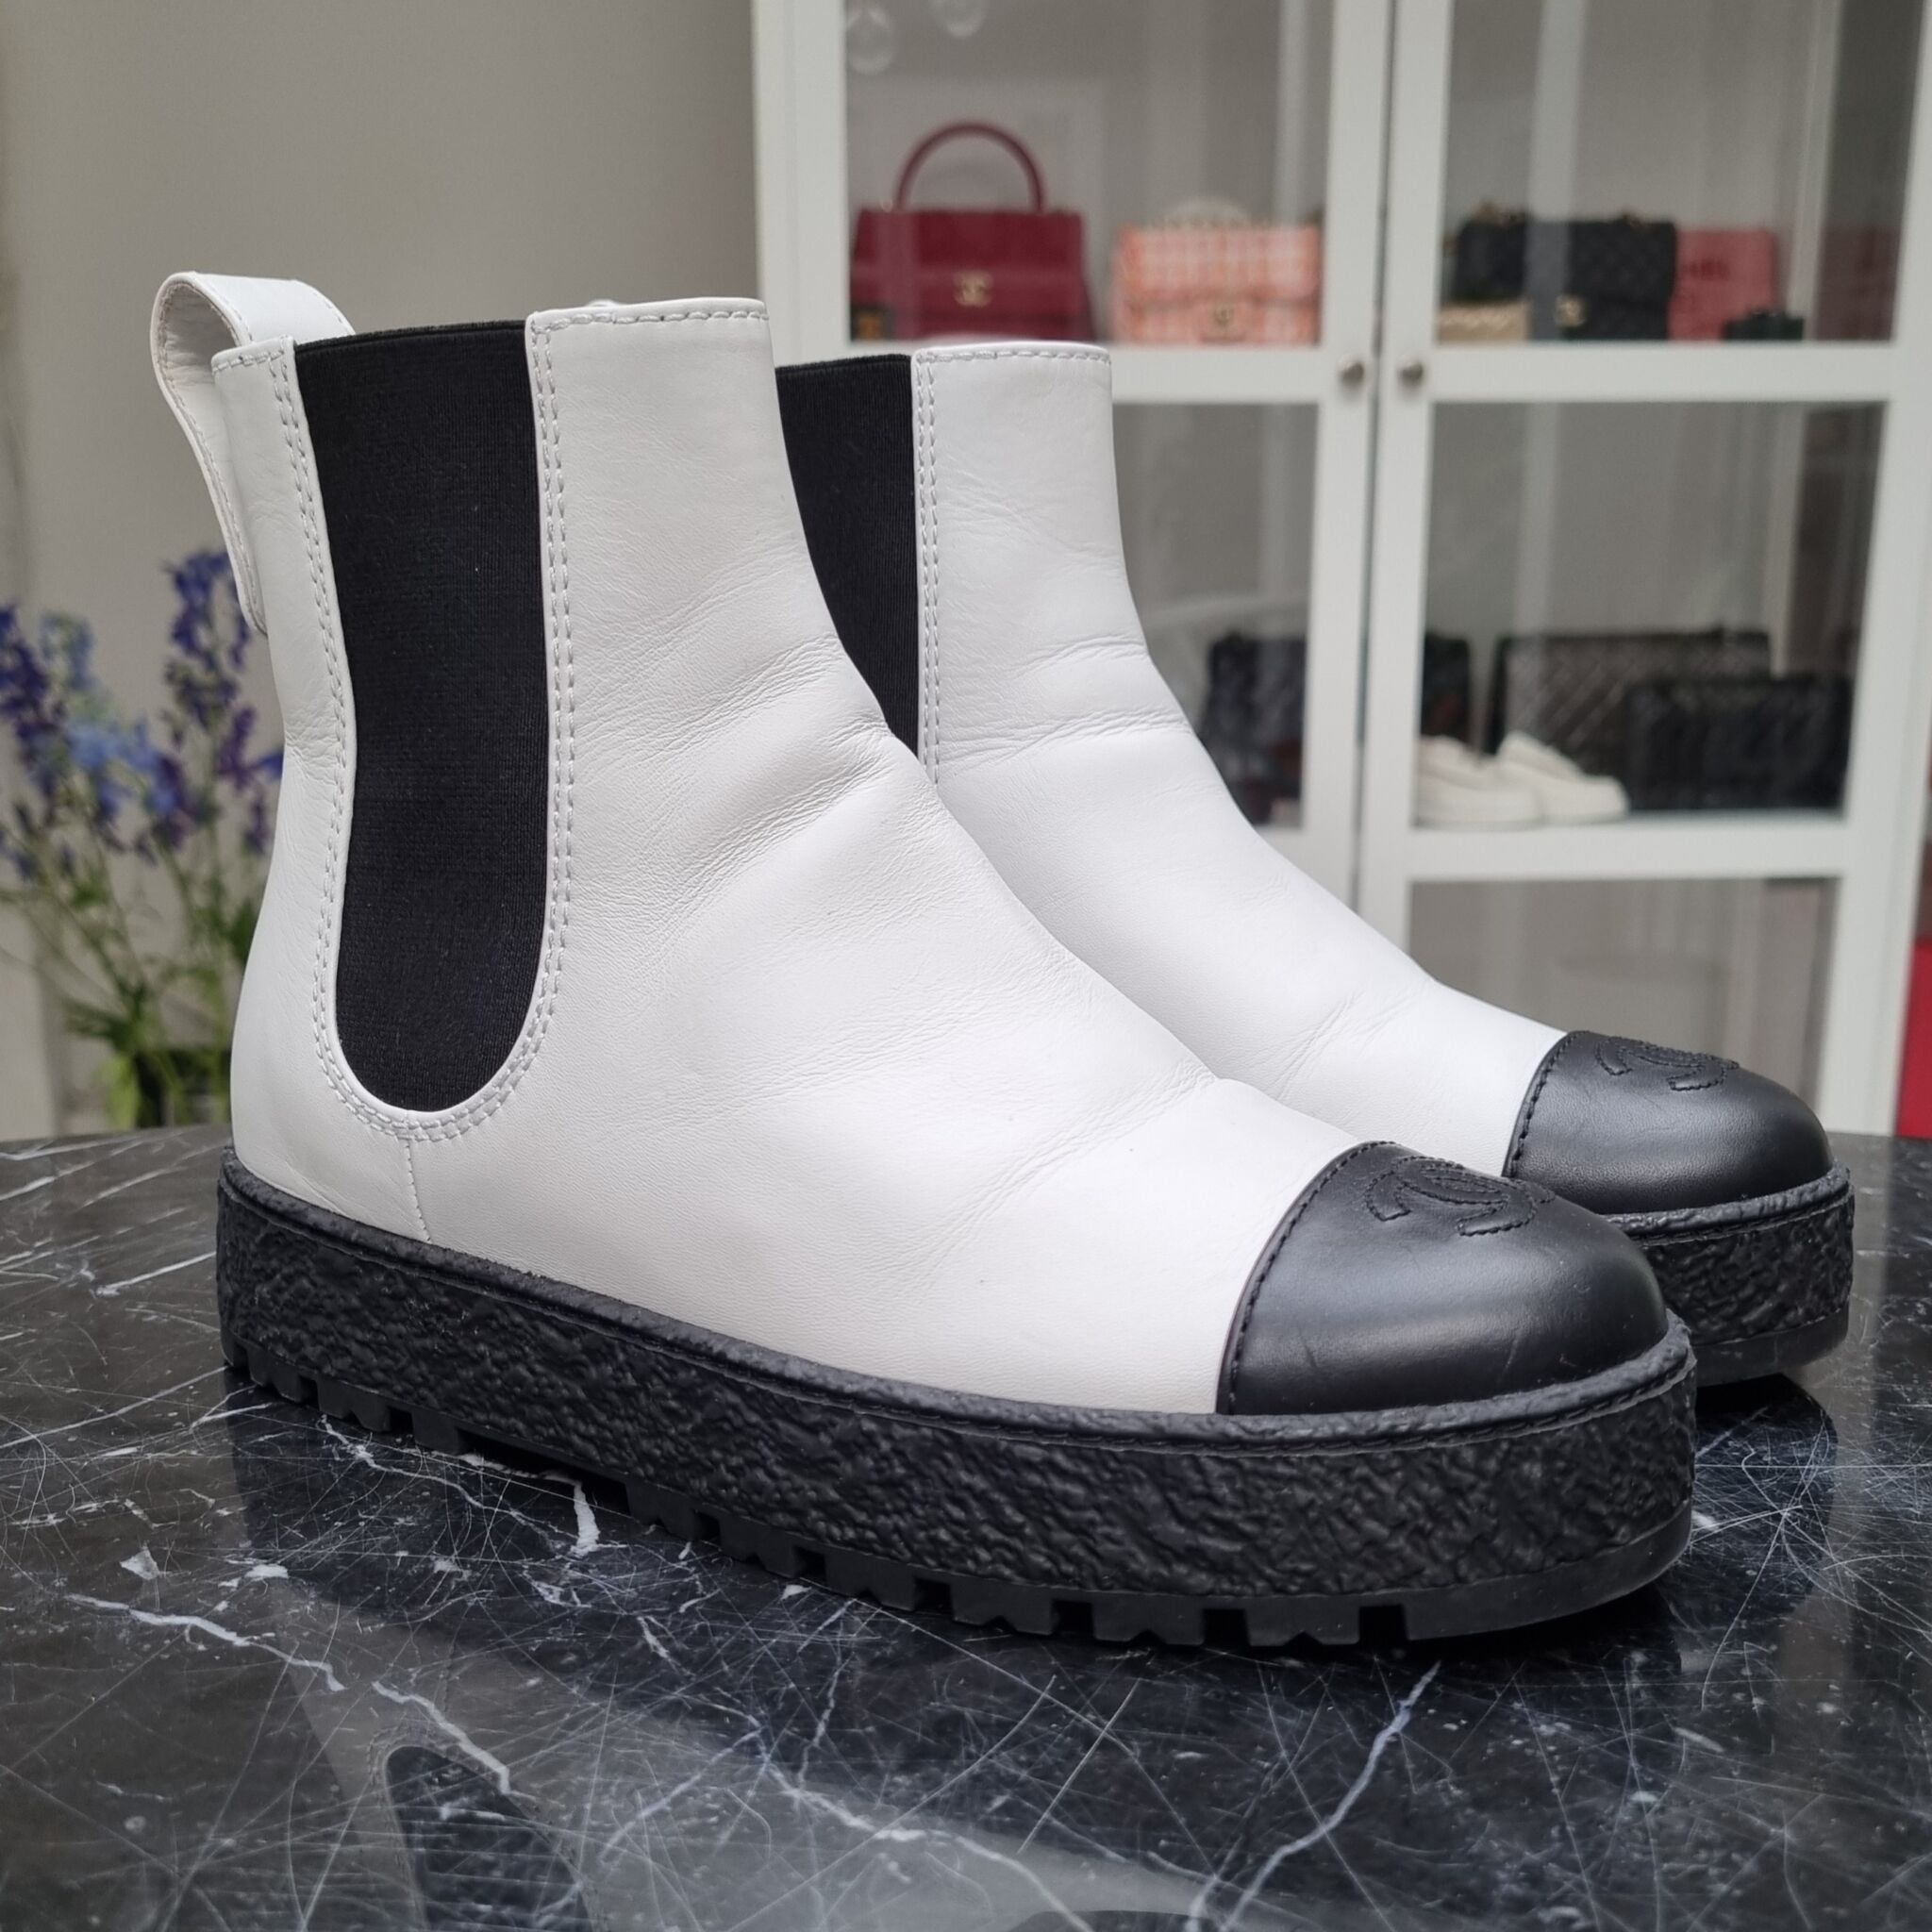 Chanel Boots, Black/White, 37.5 - Laulay Luxury